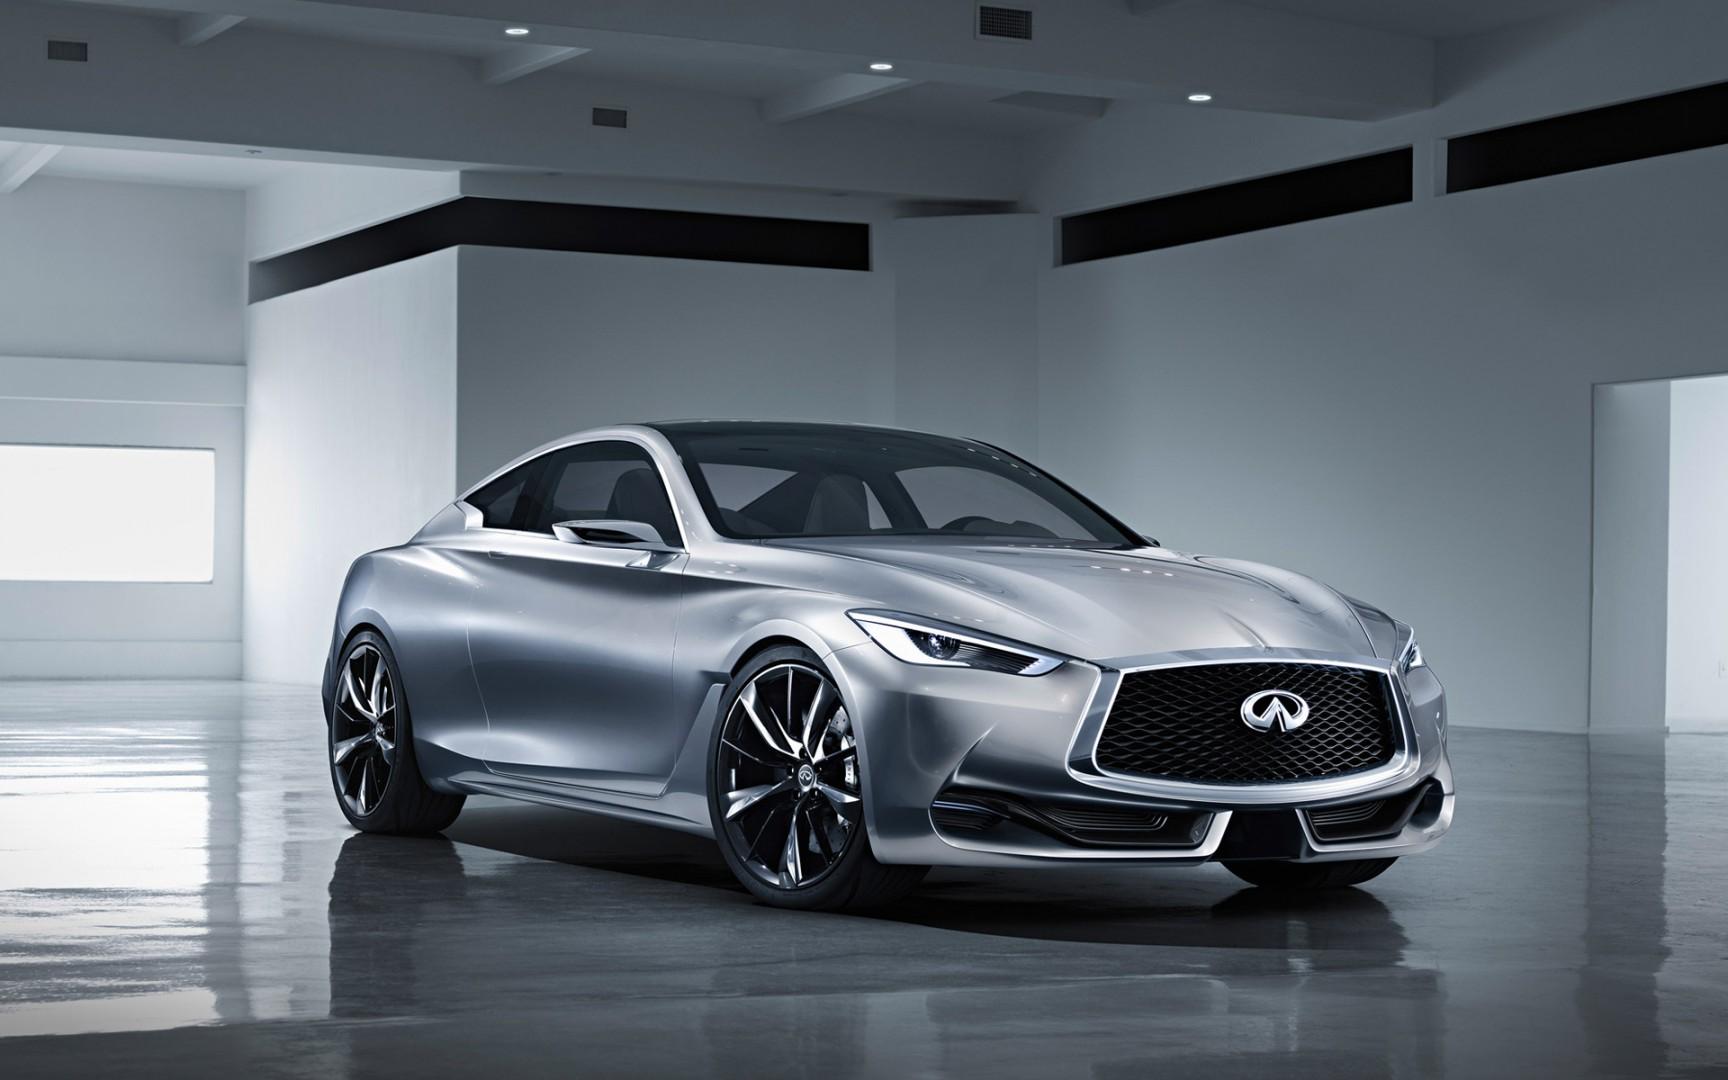 Wallpaper Blink of Infiniti Q60 Wallpaper HD for Android